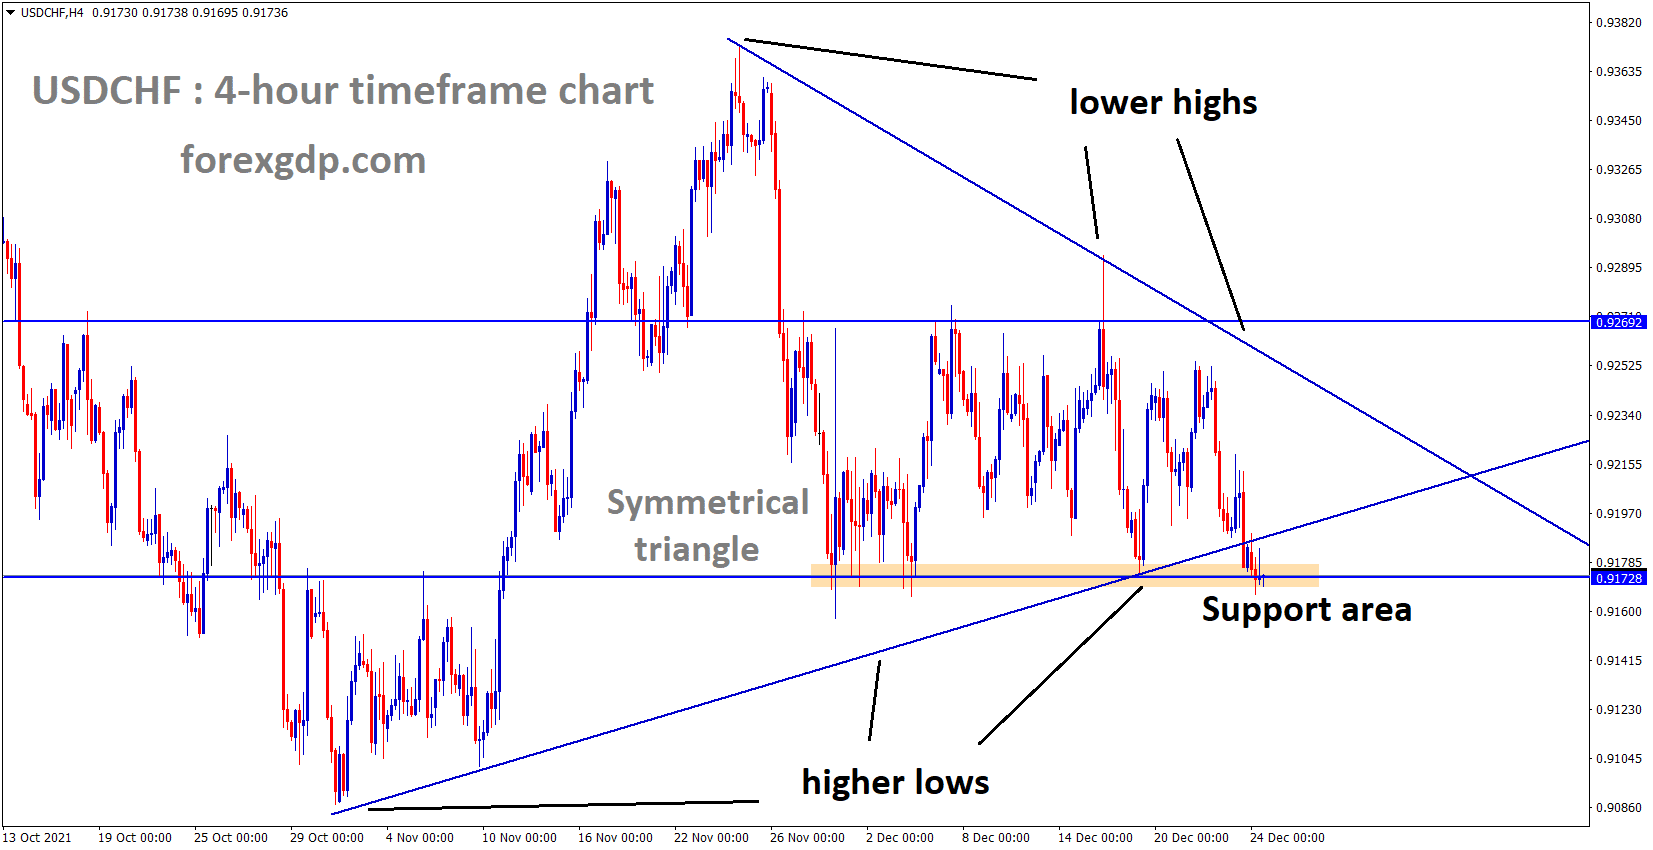 USDCHF is moving in the Symmetrical triangle pattern and the market has reached the horizontal support area of the pattern.